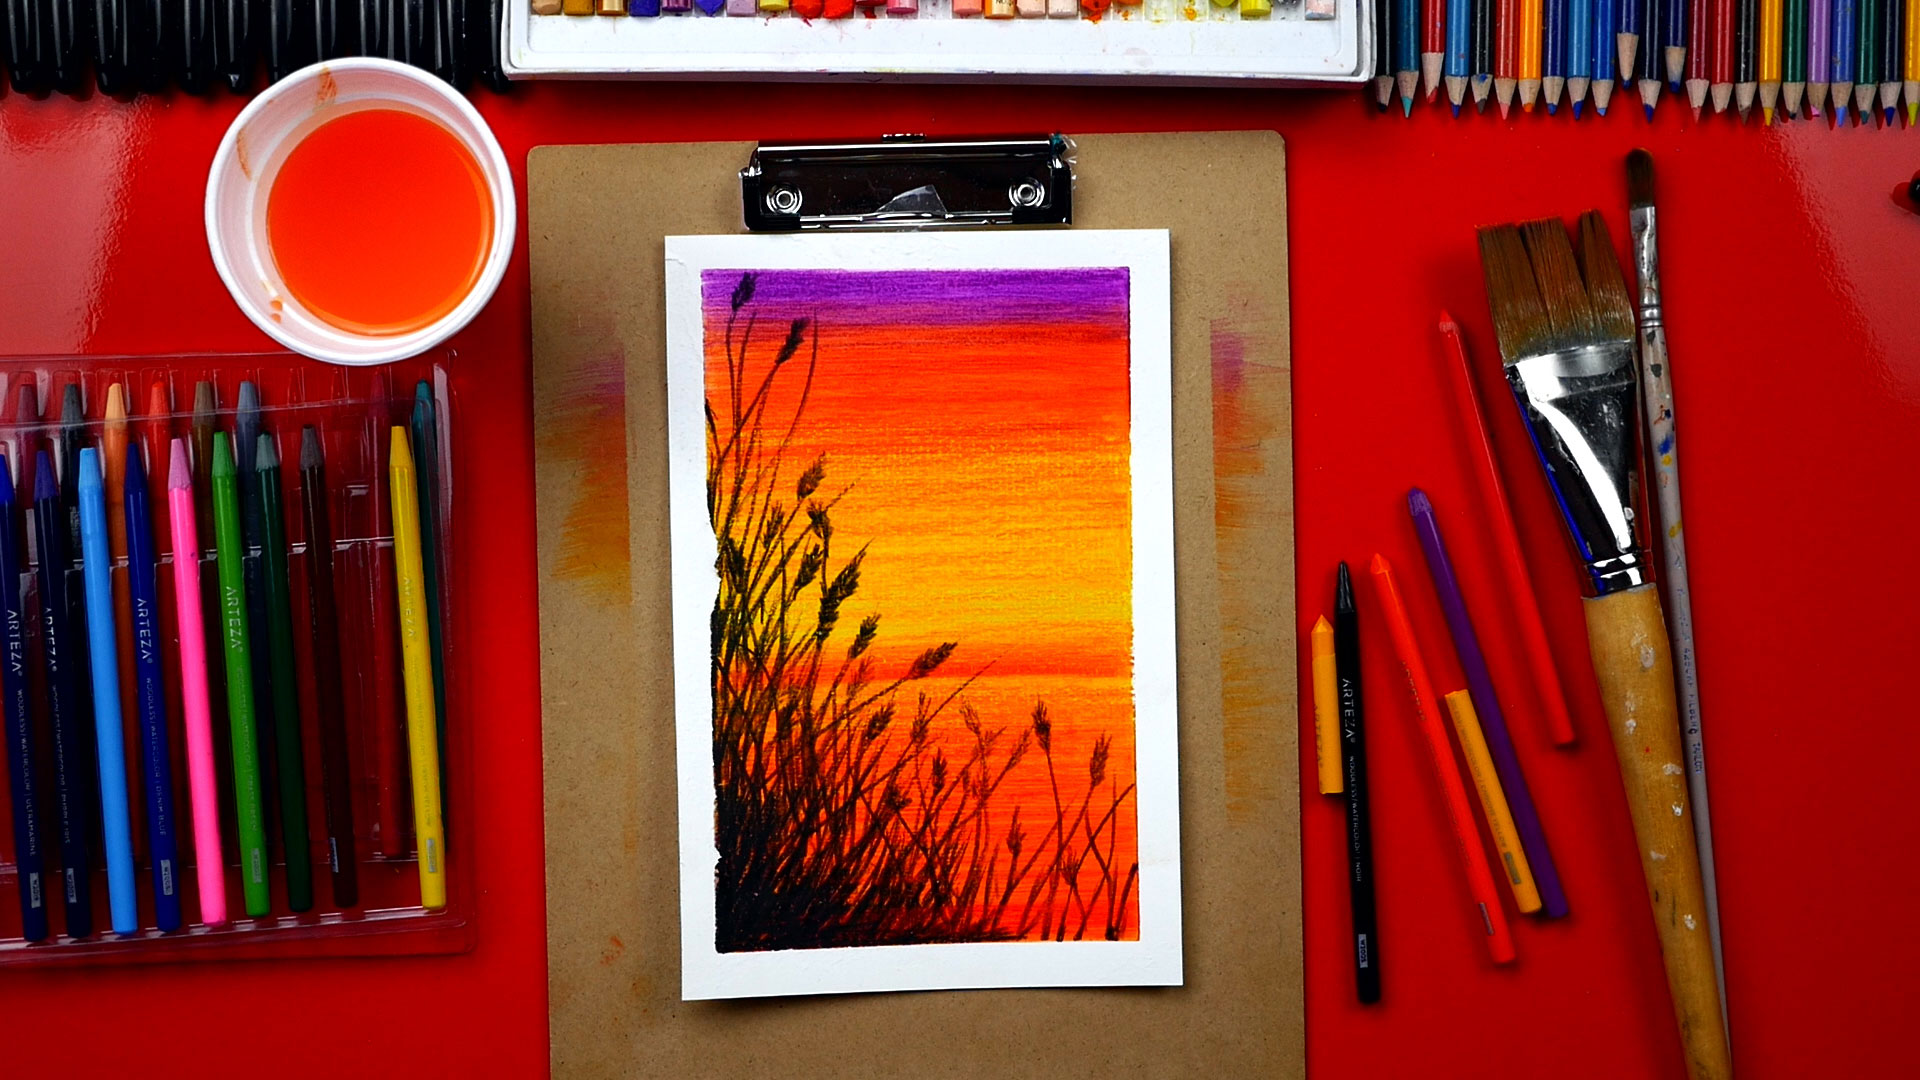 https://artforkidshub.com/wp-content/uploads/2018/02/How-To-Use-Watercolor-Pencils-To-Paint-A-Sunset-feature.jpg